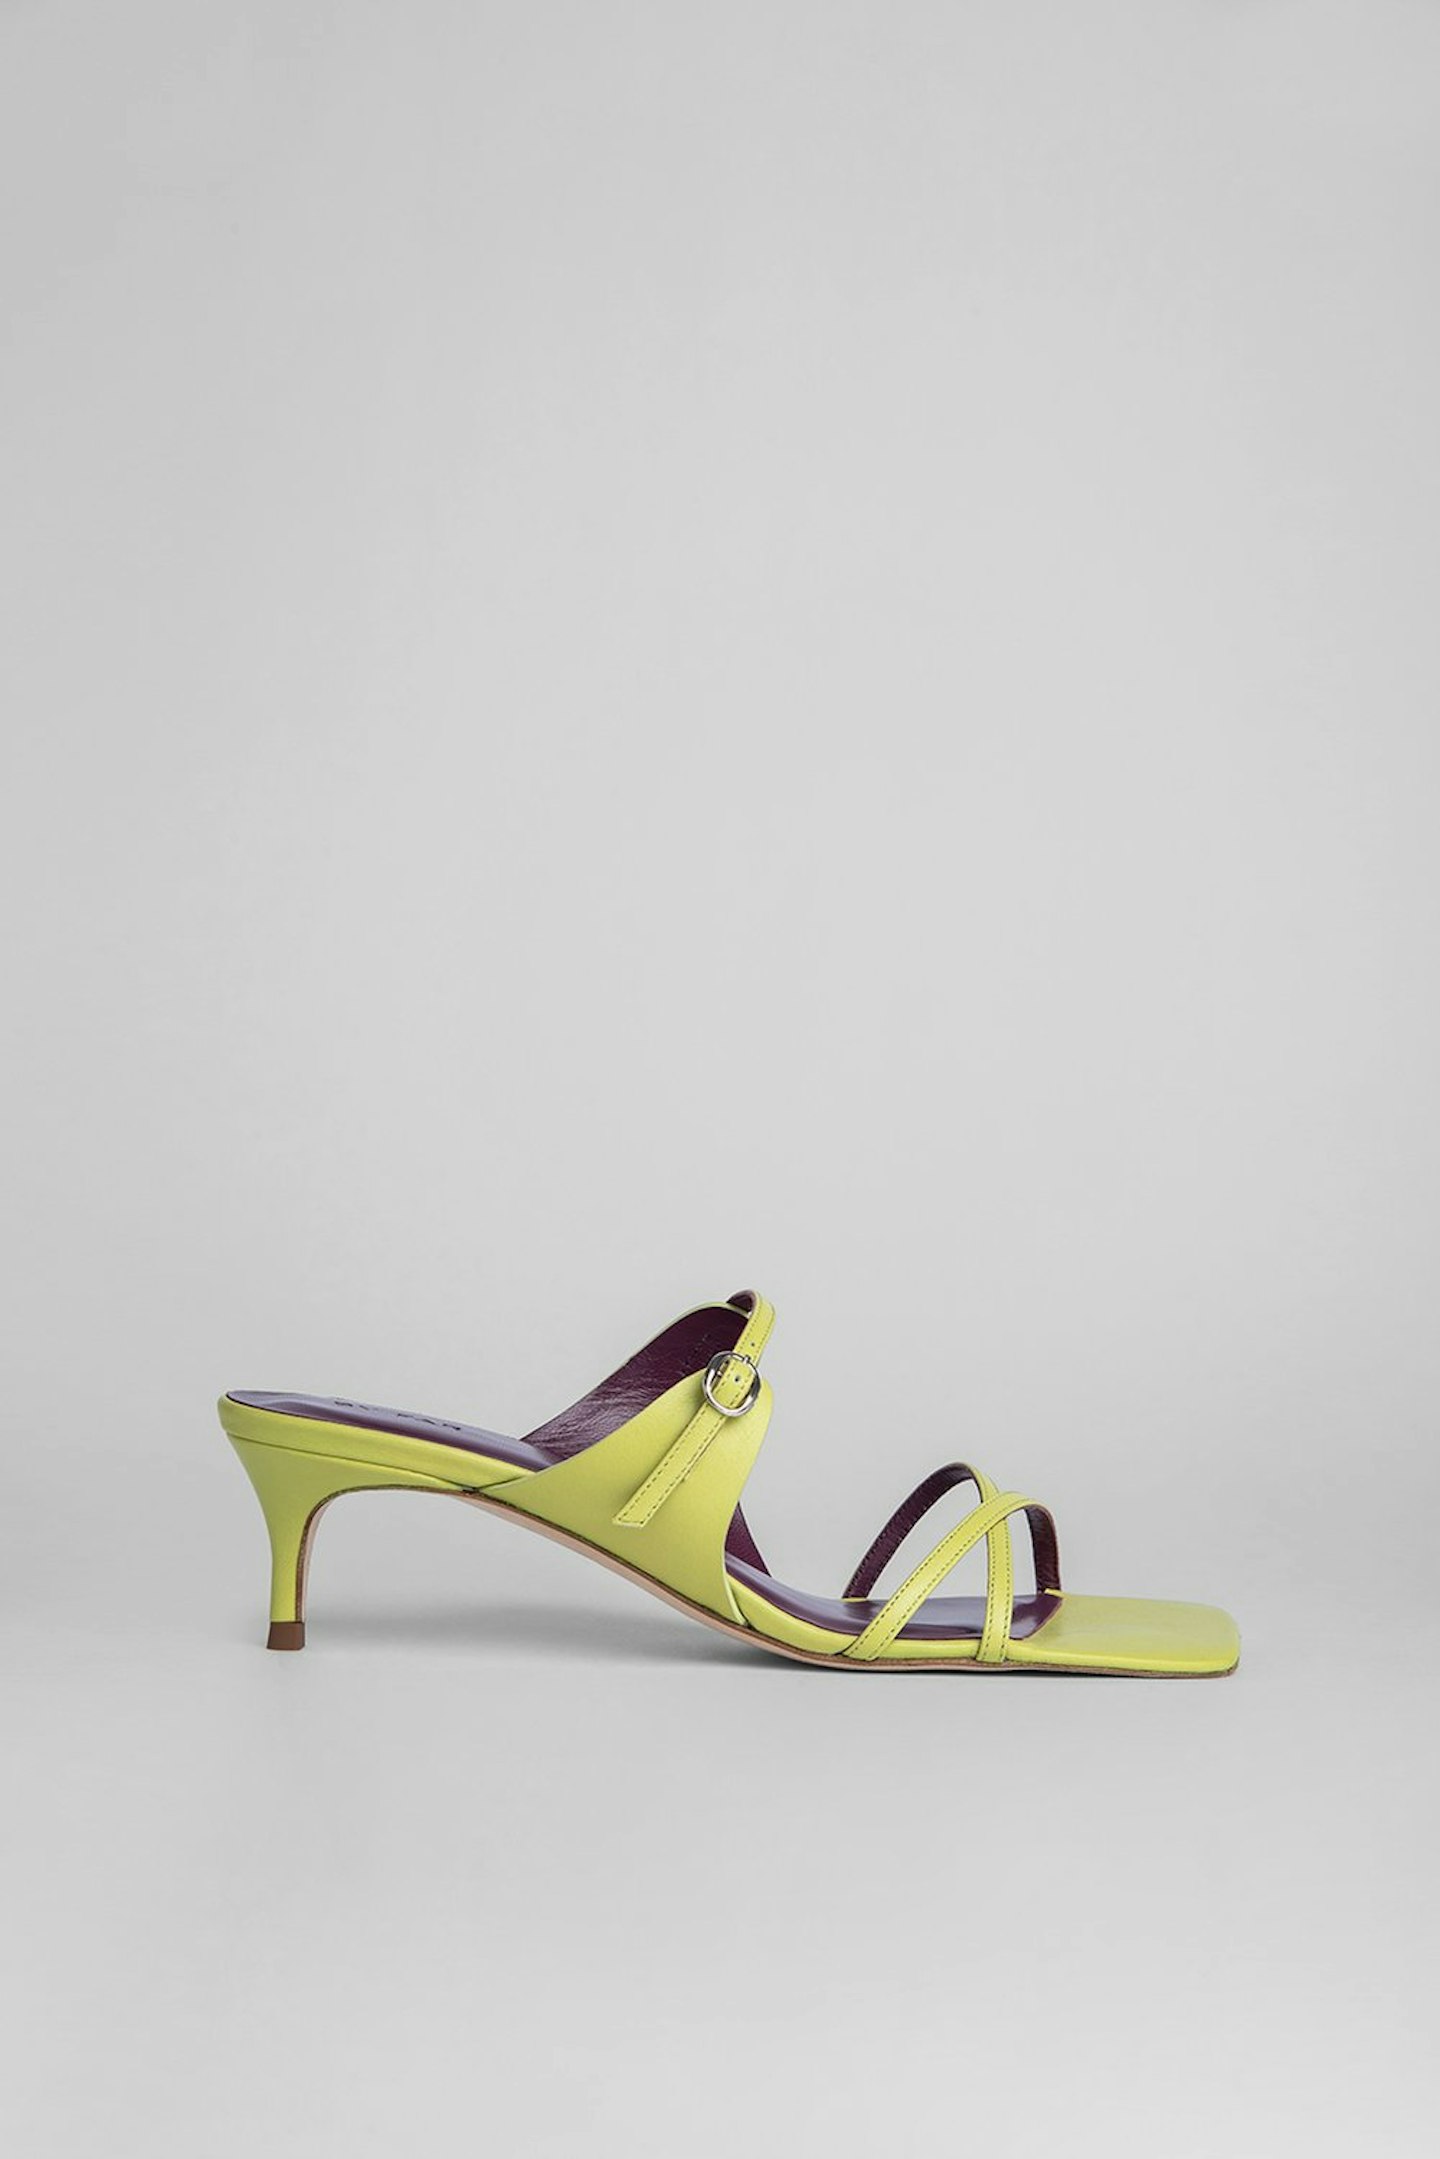 By Far, Candy Melon Green Leather Sandals, £330